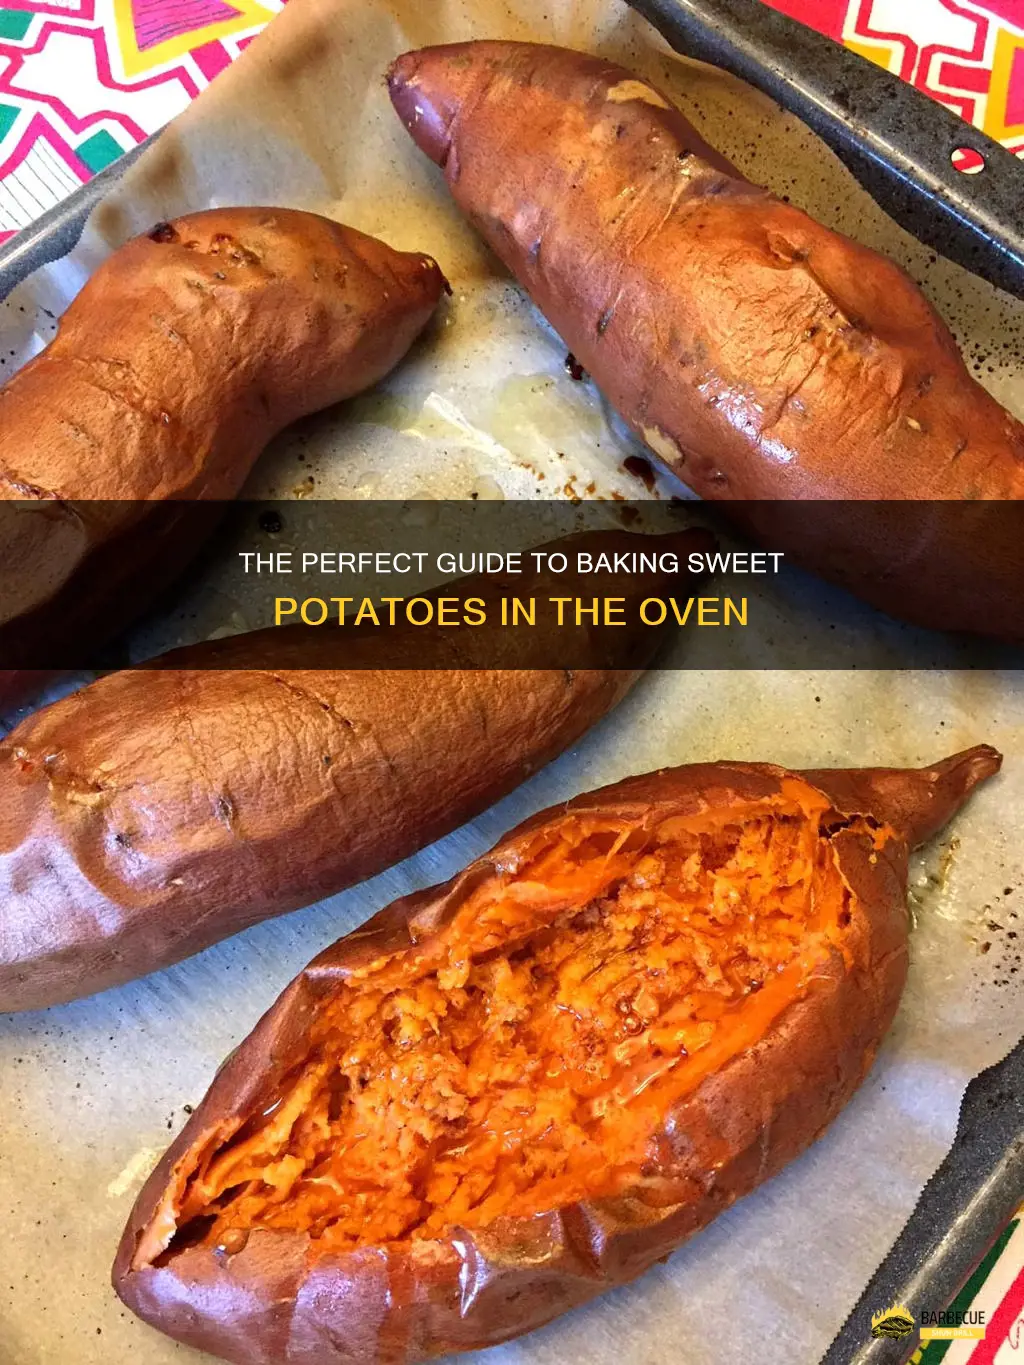 The Perfect Guide To Baking Sweet Potatoes In The Oven | ShunGrill